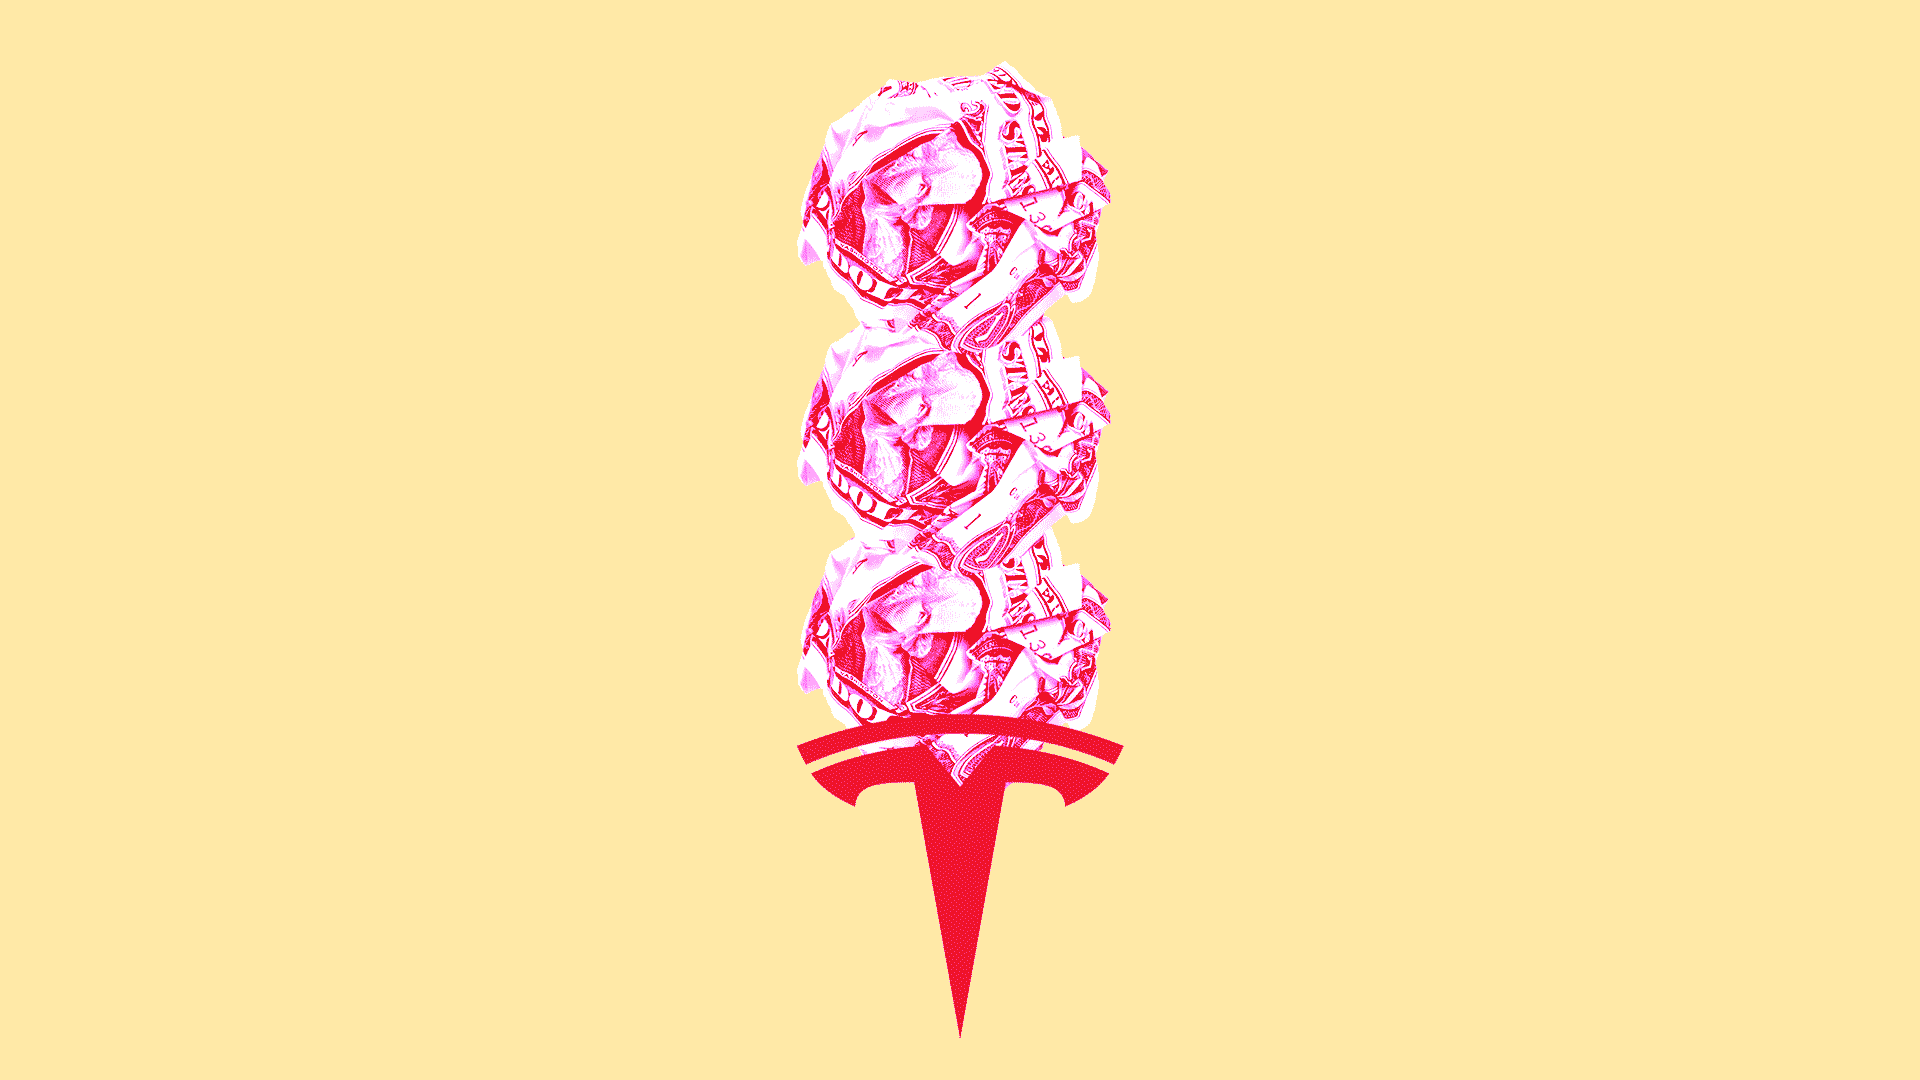 Illustration of Tesla logo as an ice cream cone with money instead of ice cream